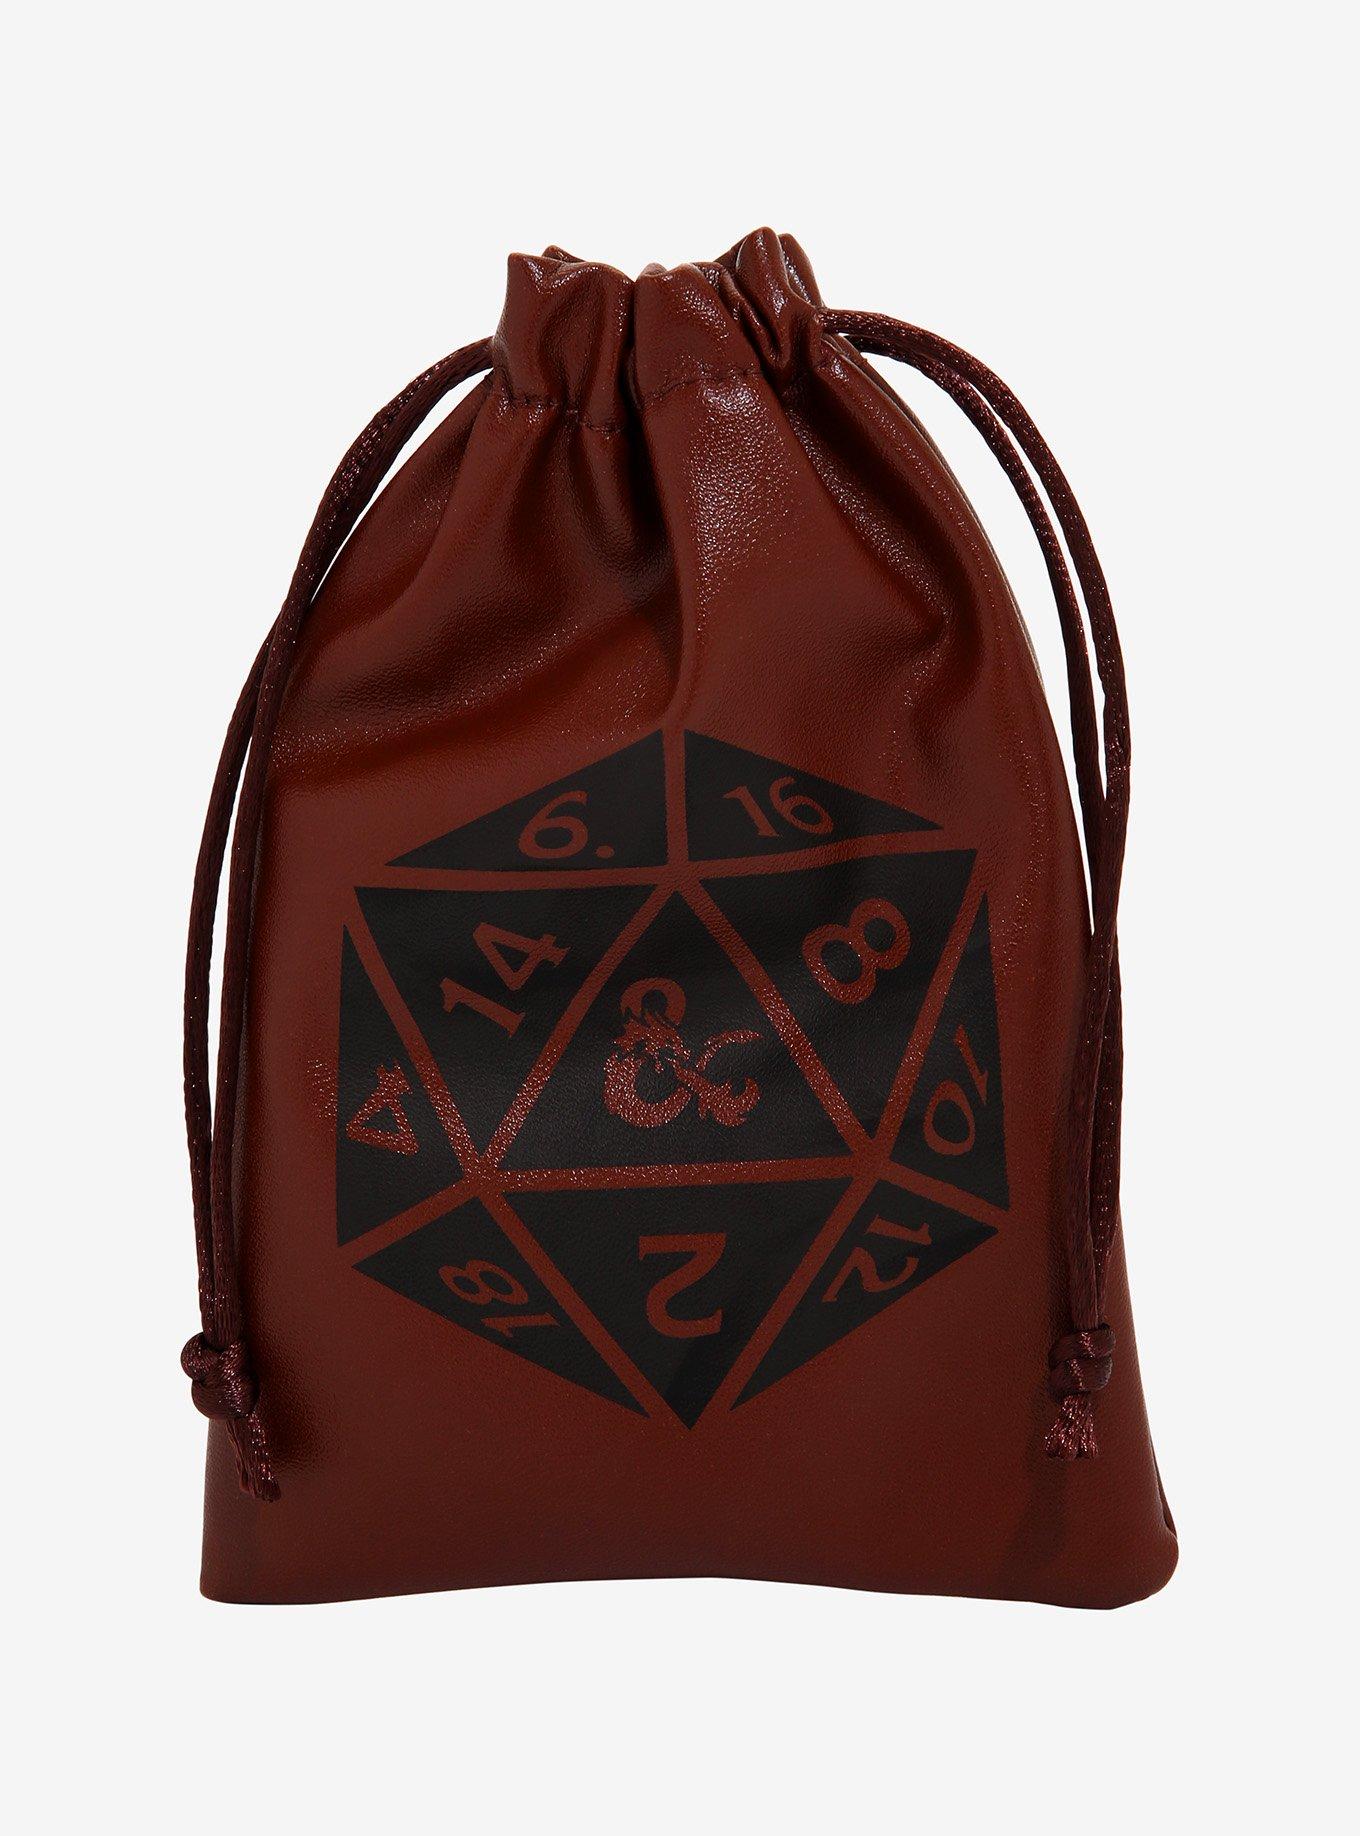 Dungeons & Dragons Polyhedral Dice & Bag Set | Hot Topic